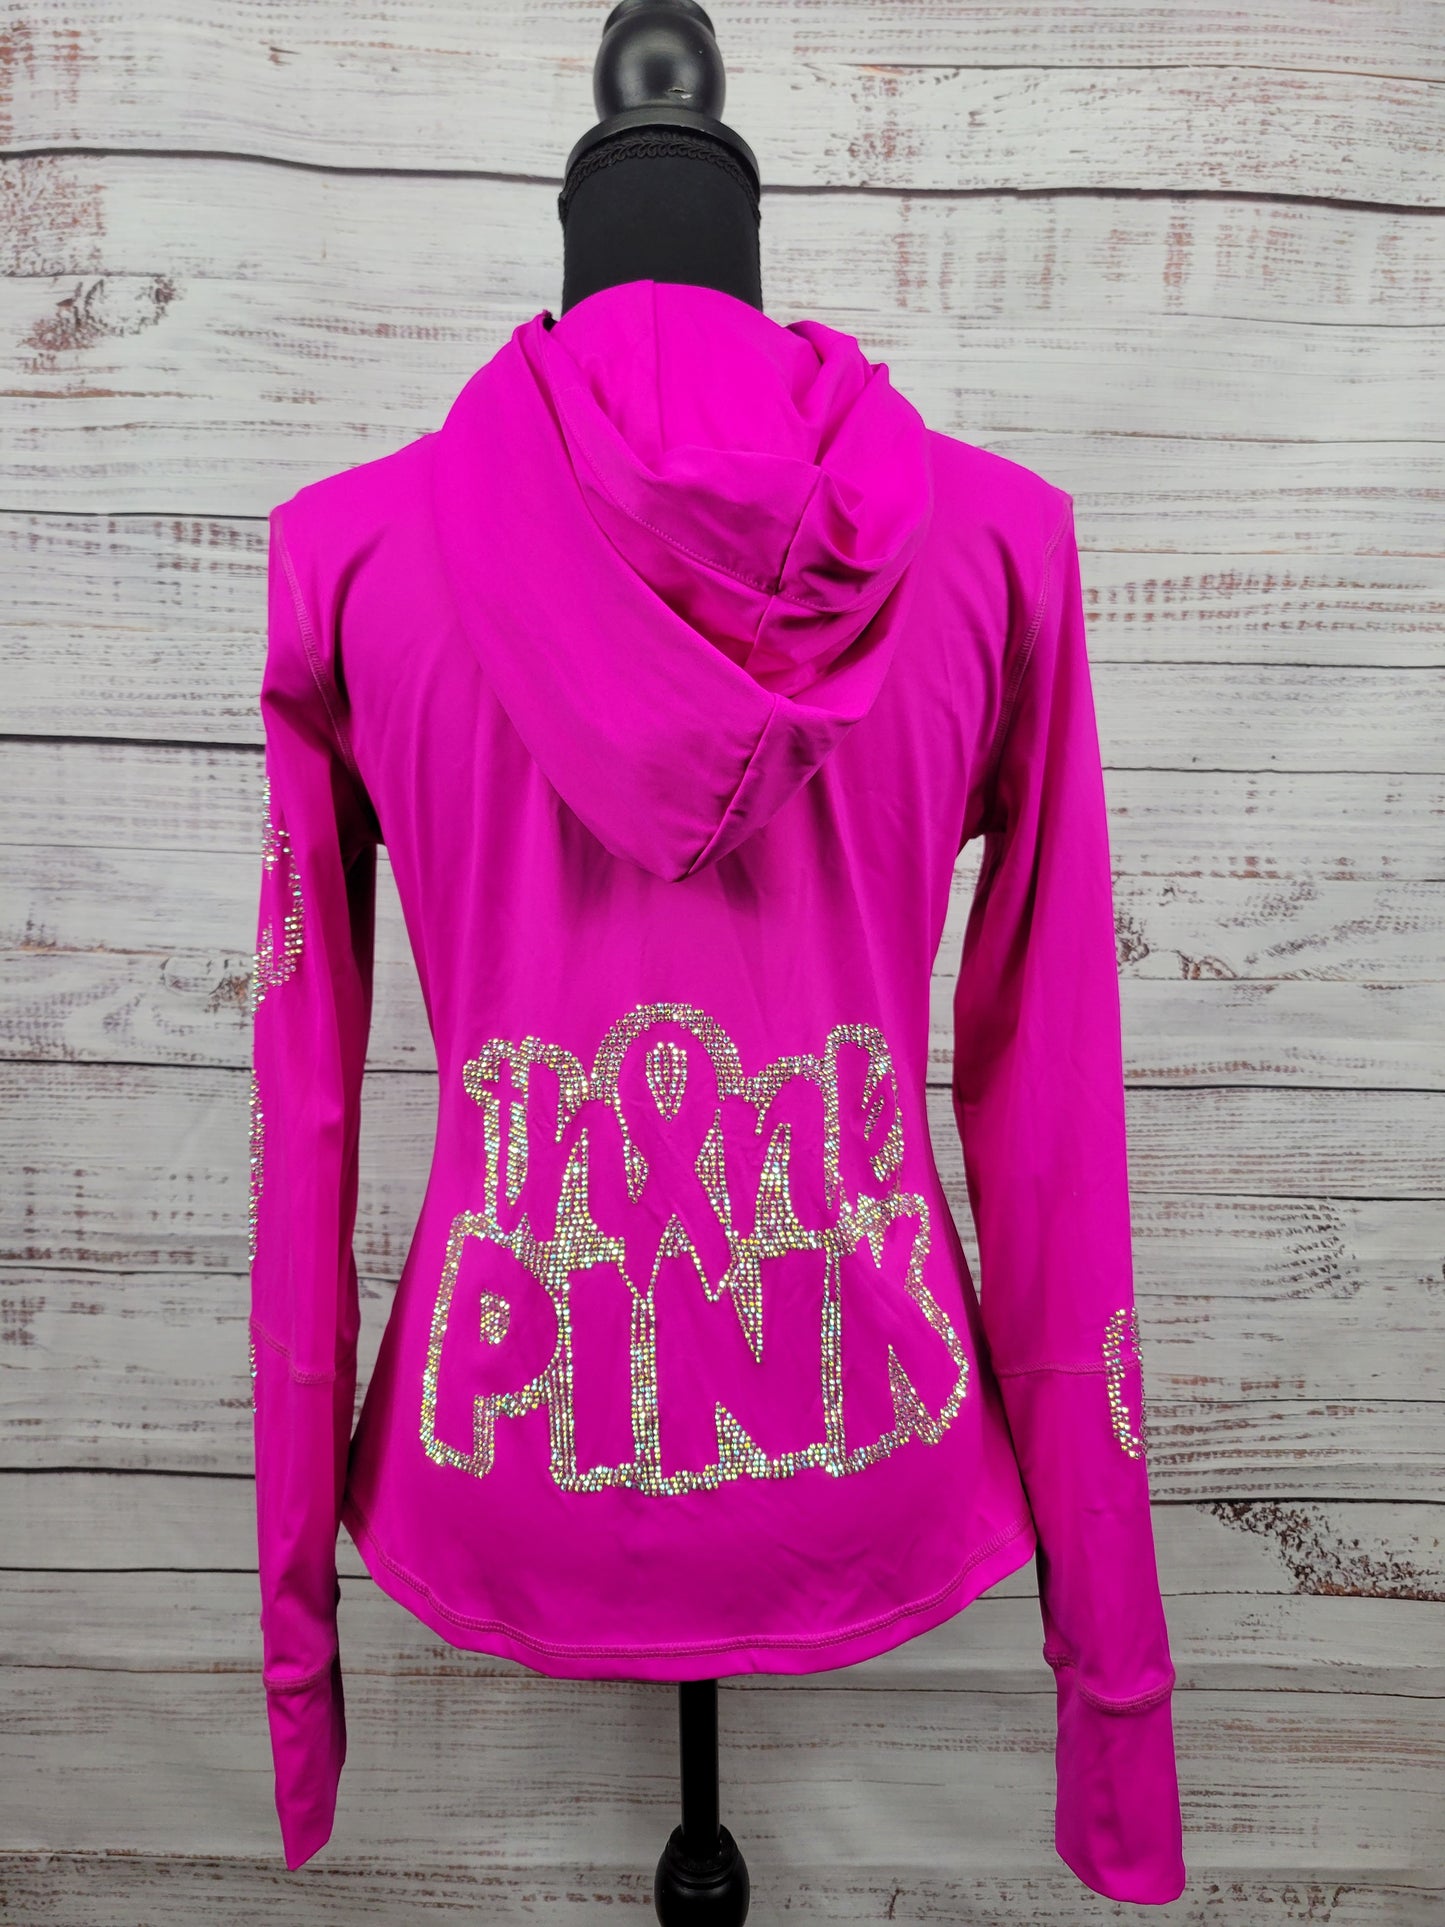 Outlaw Faith Wear Think Pink Cancer Awareness Jacket